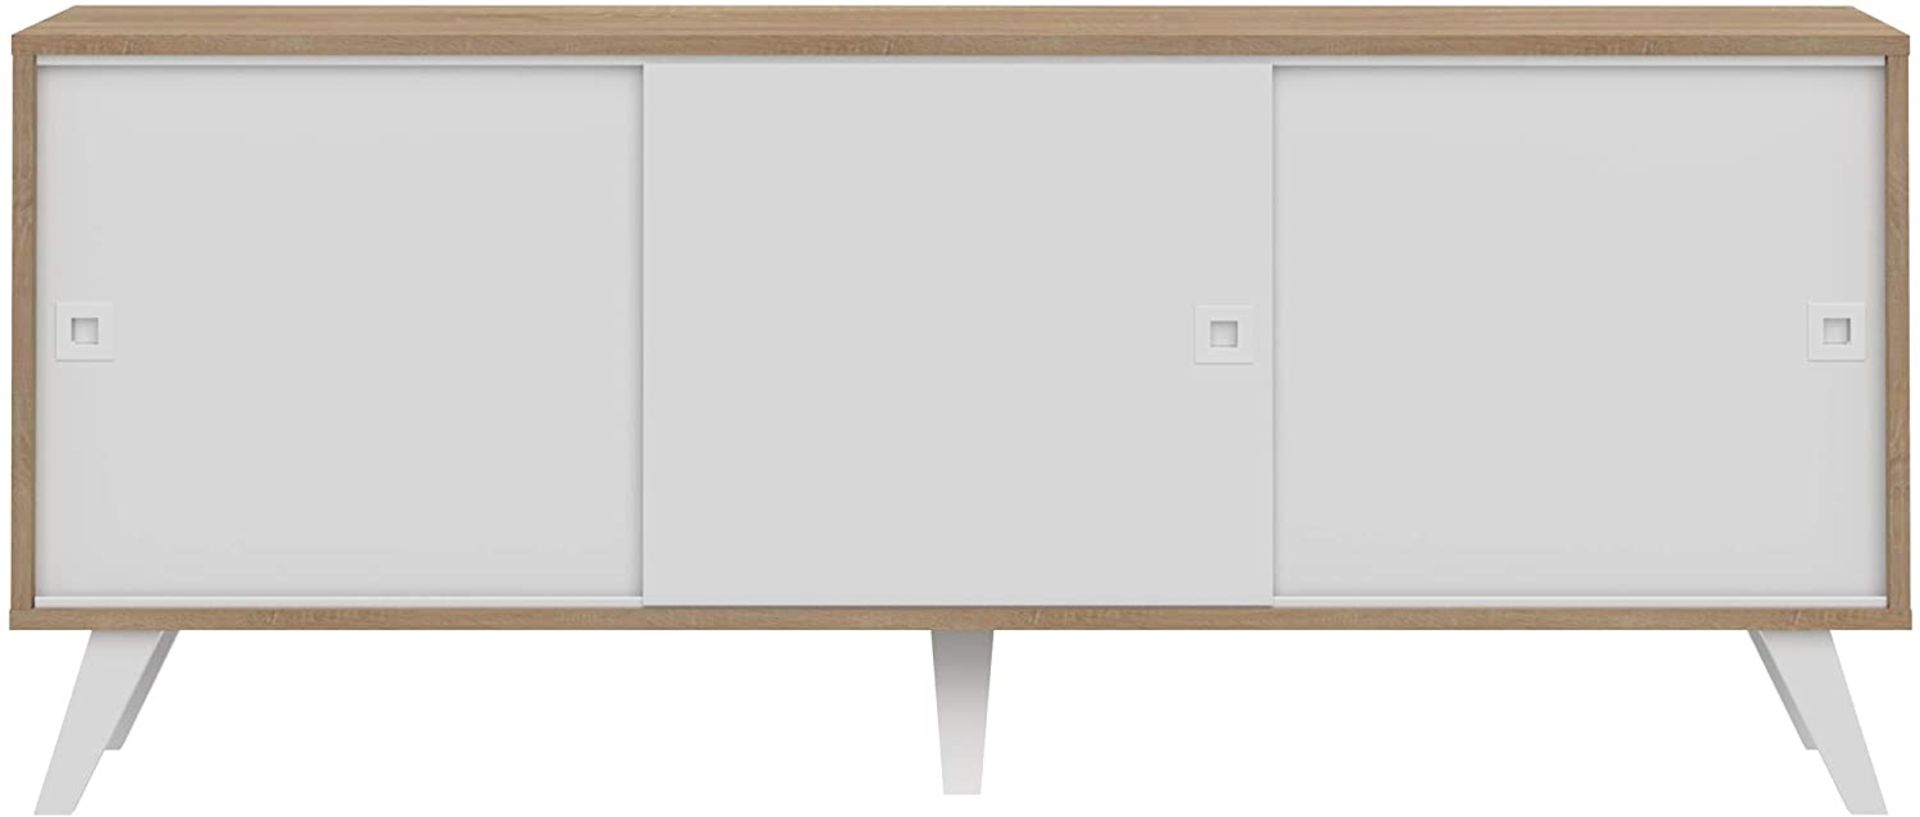 1 x Prism Moden 3-Door Sideboard With An Oak/White Finish - Dimensions: 61.8 x 149 x 40 cm - Made In - Image 2 of 7